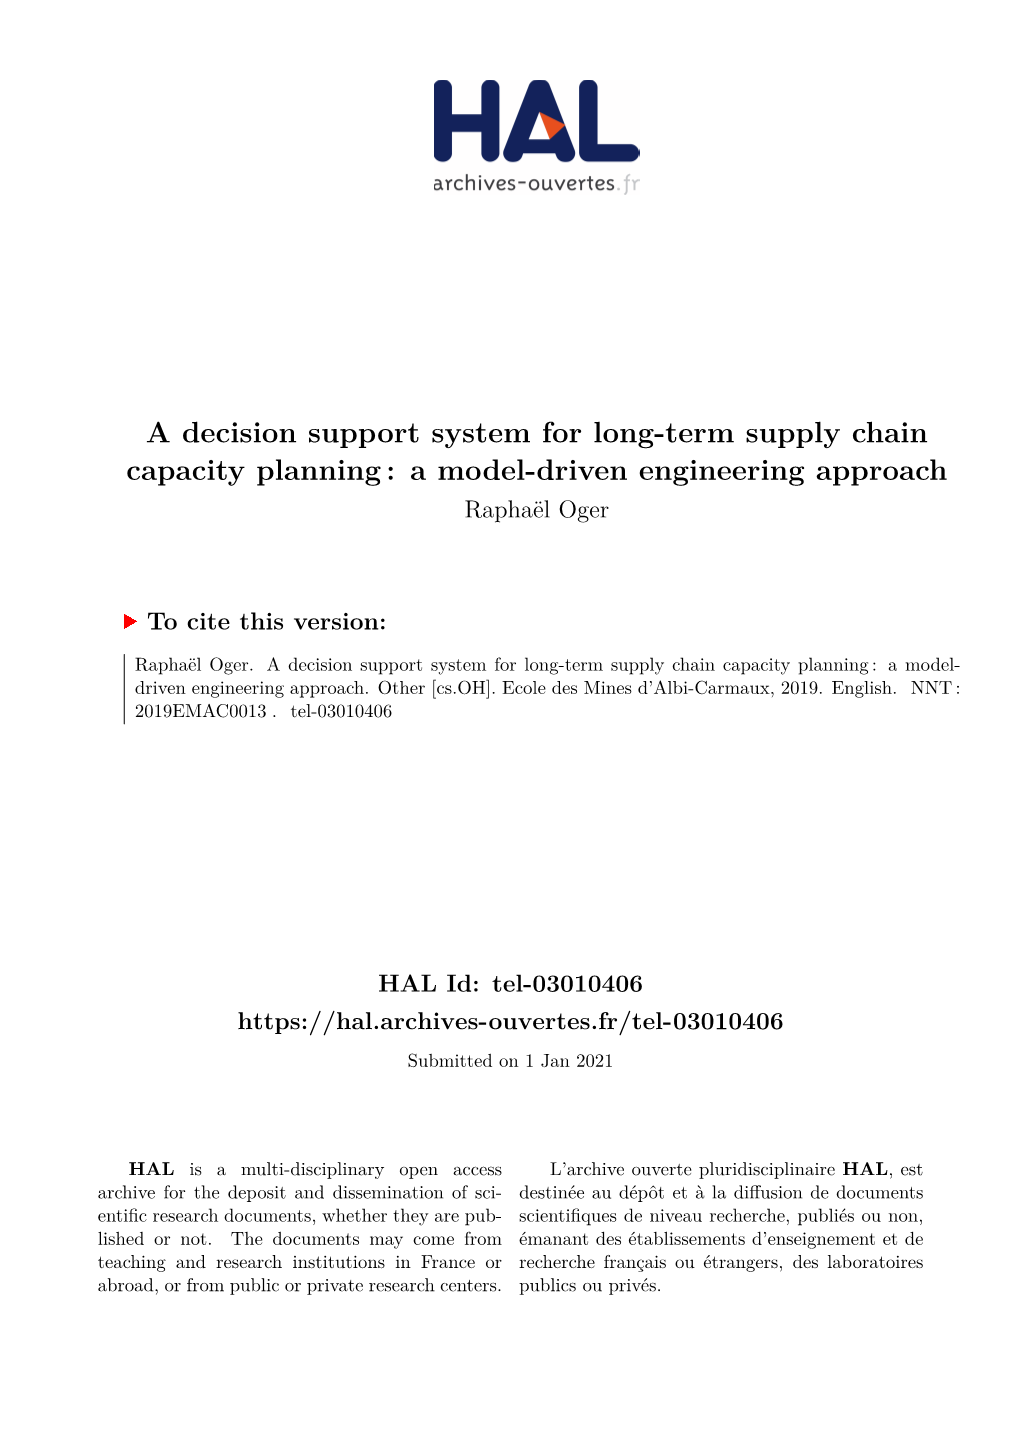 A Decision Support System for Long-Term Supply Chain Capacity Planning : a Model-Driven Engineering Approach Raphaël Oger